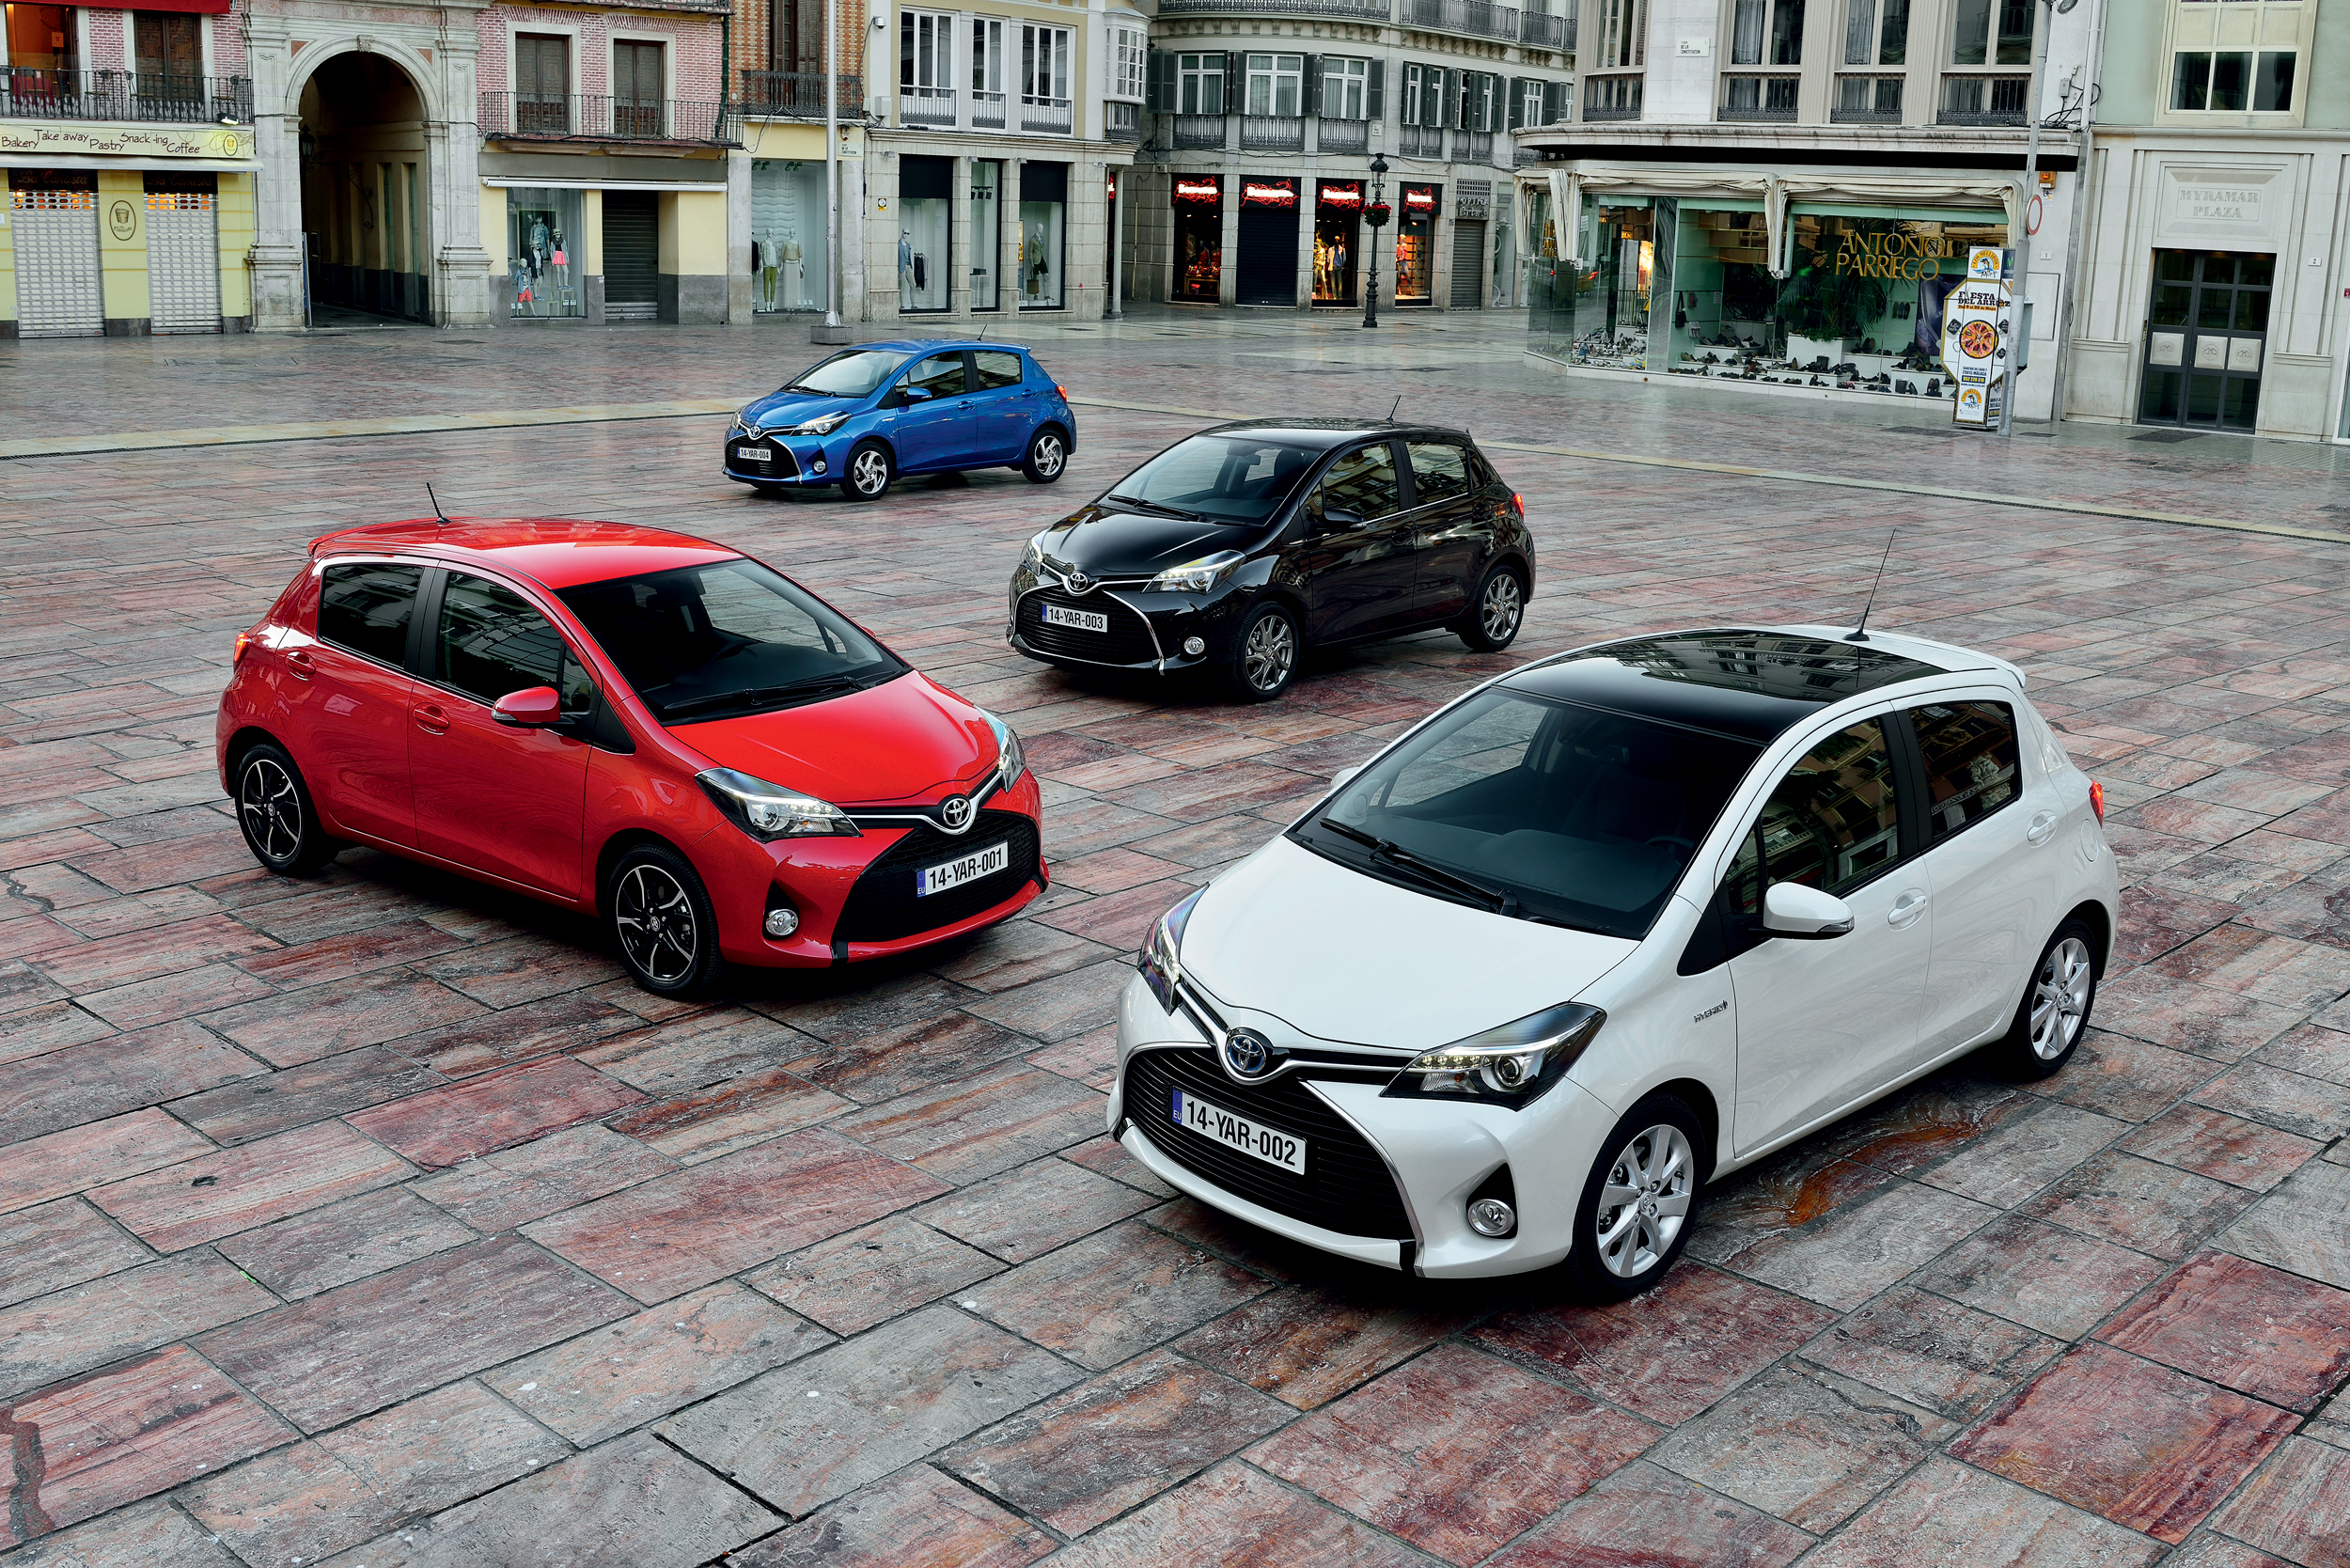 New 2014 Toyota Yaris review